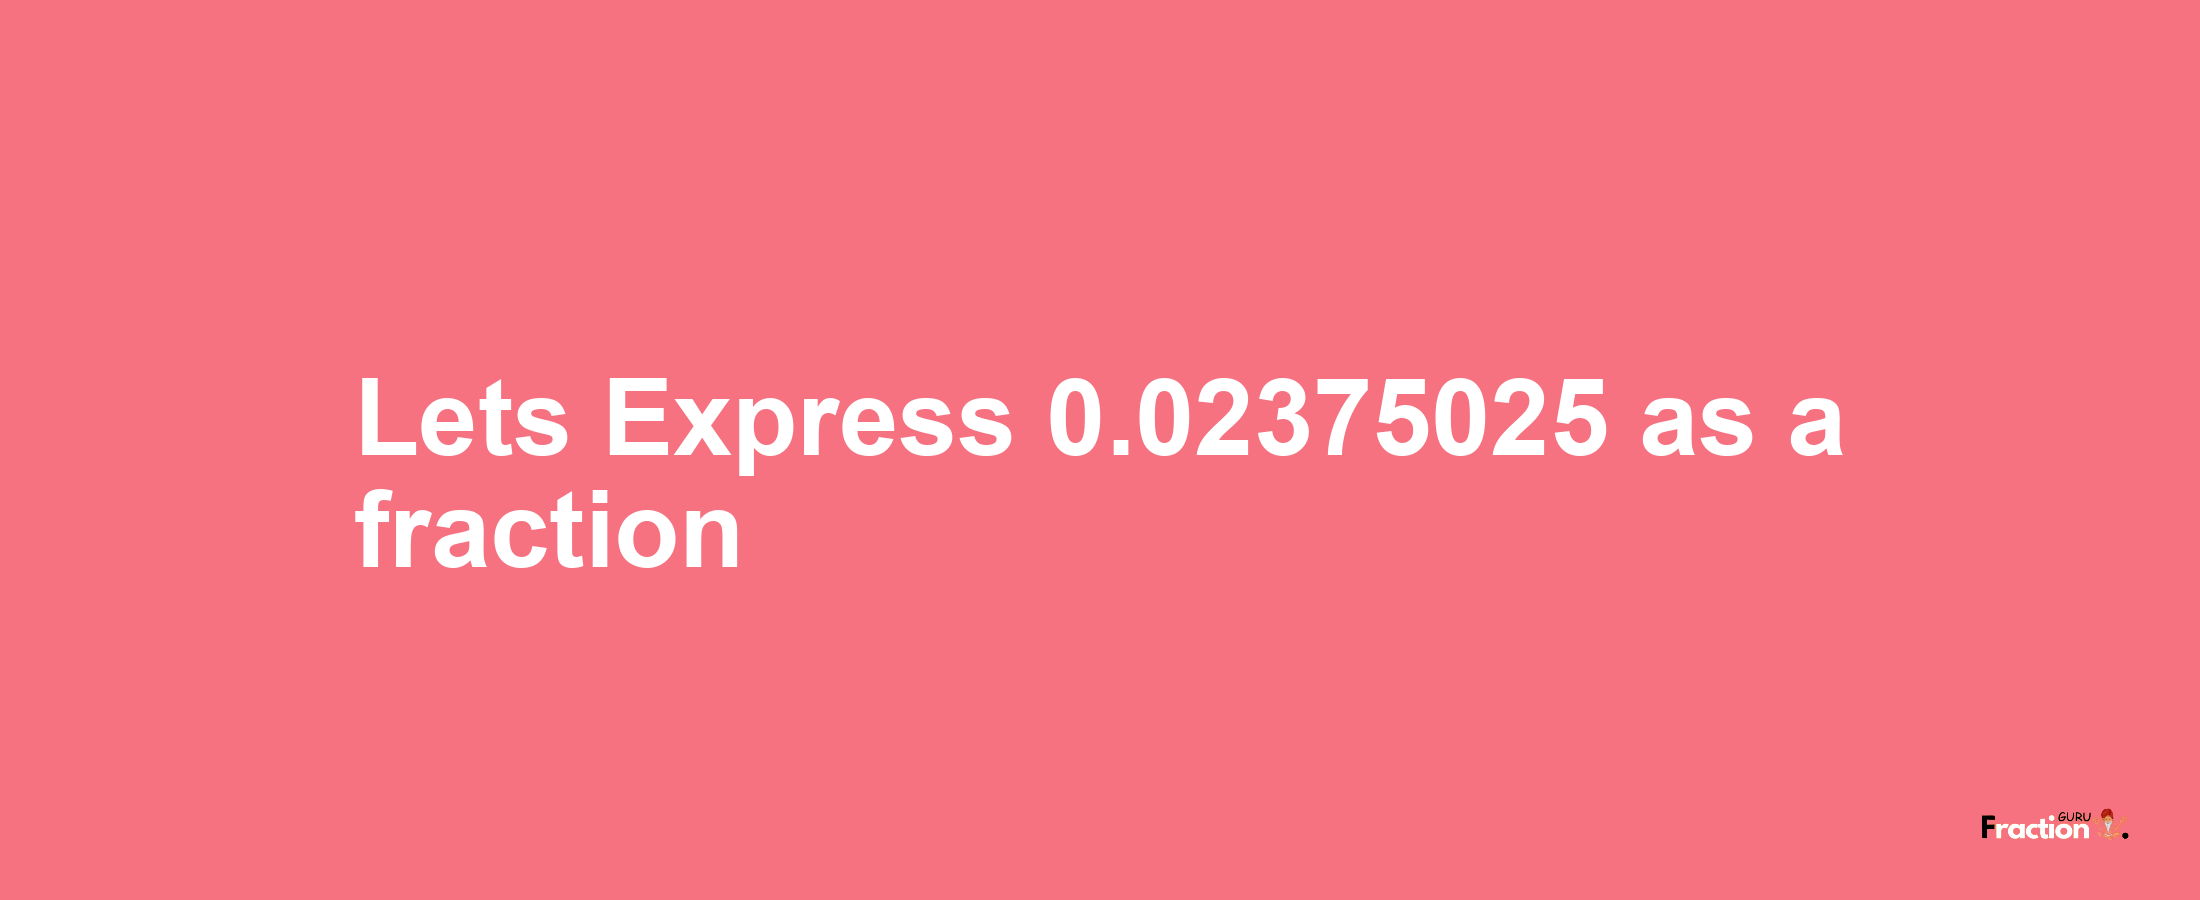 Lets Express 0.02375025 as afraction